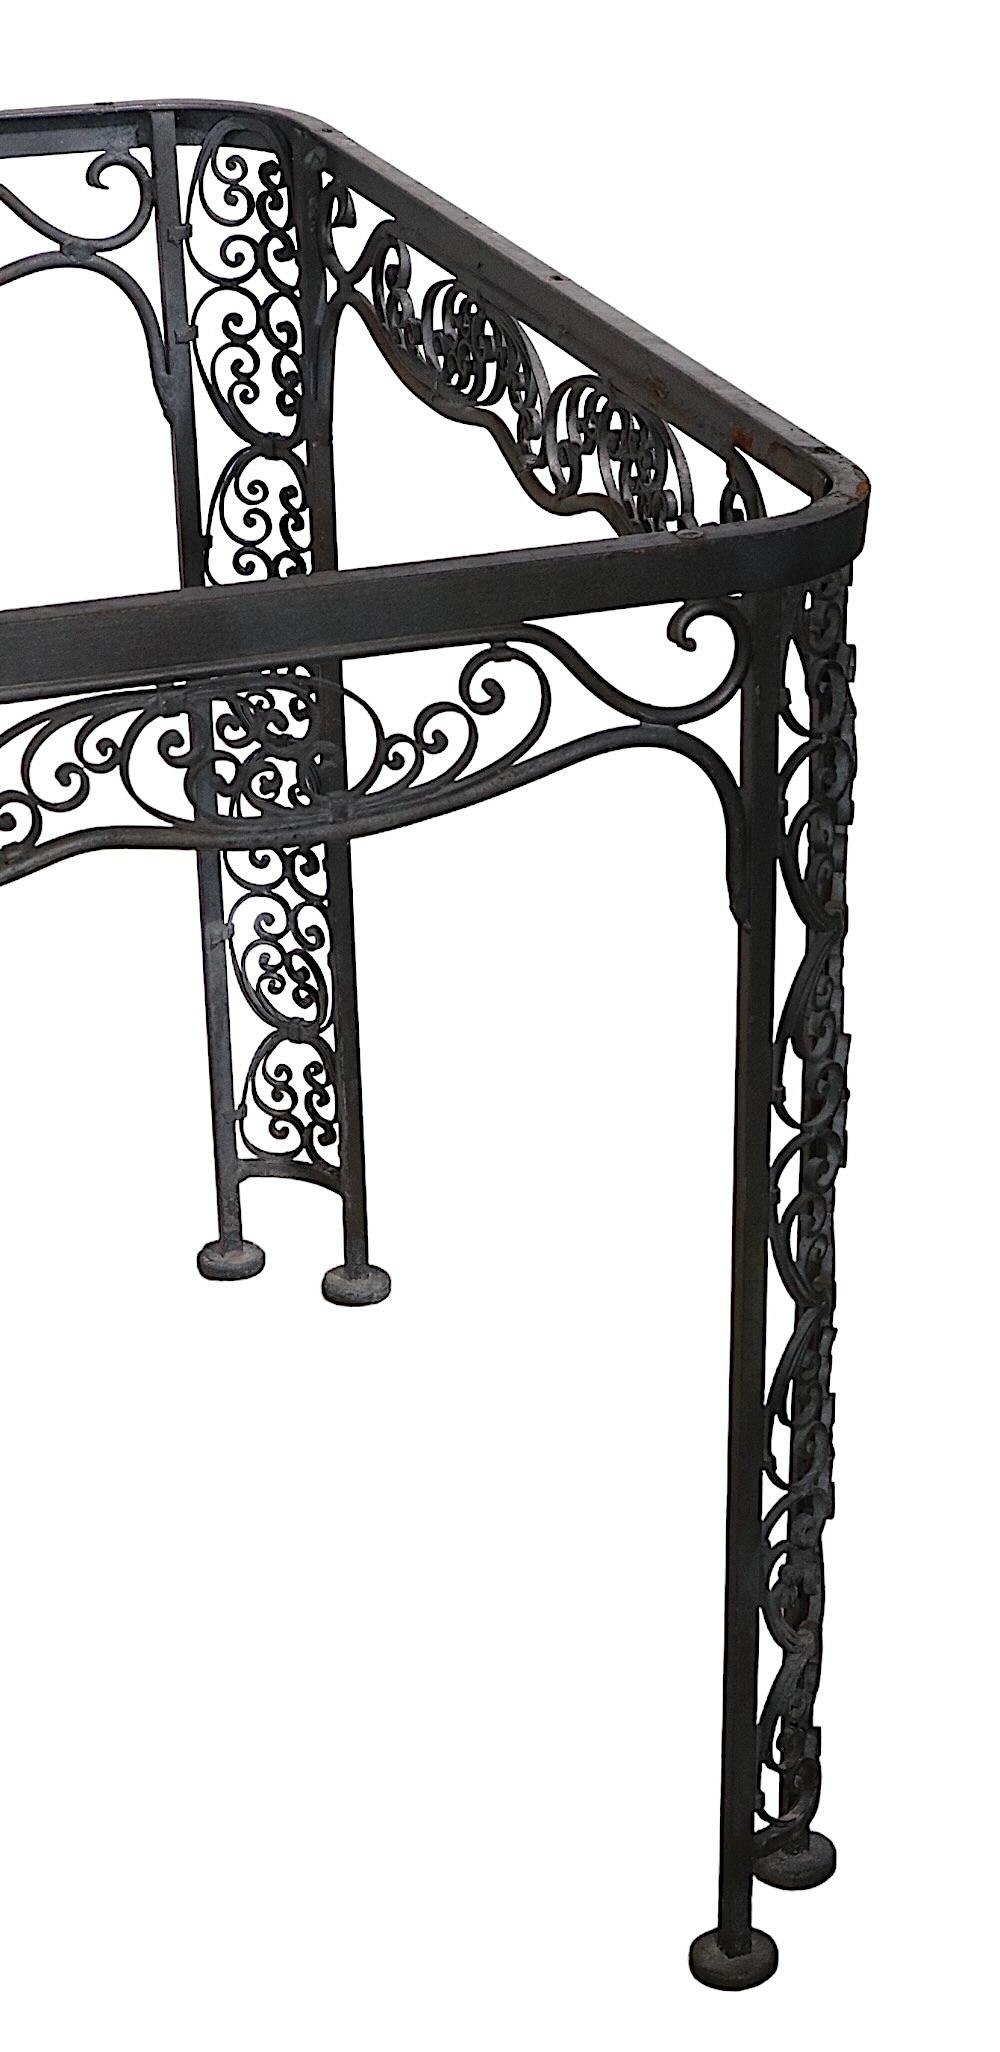 Ornate Wrought Iron Garden Patio Poolside Dining Table by Lee Woodard, c 1940's For Sale 6